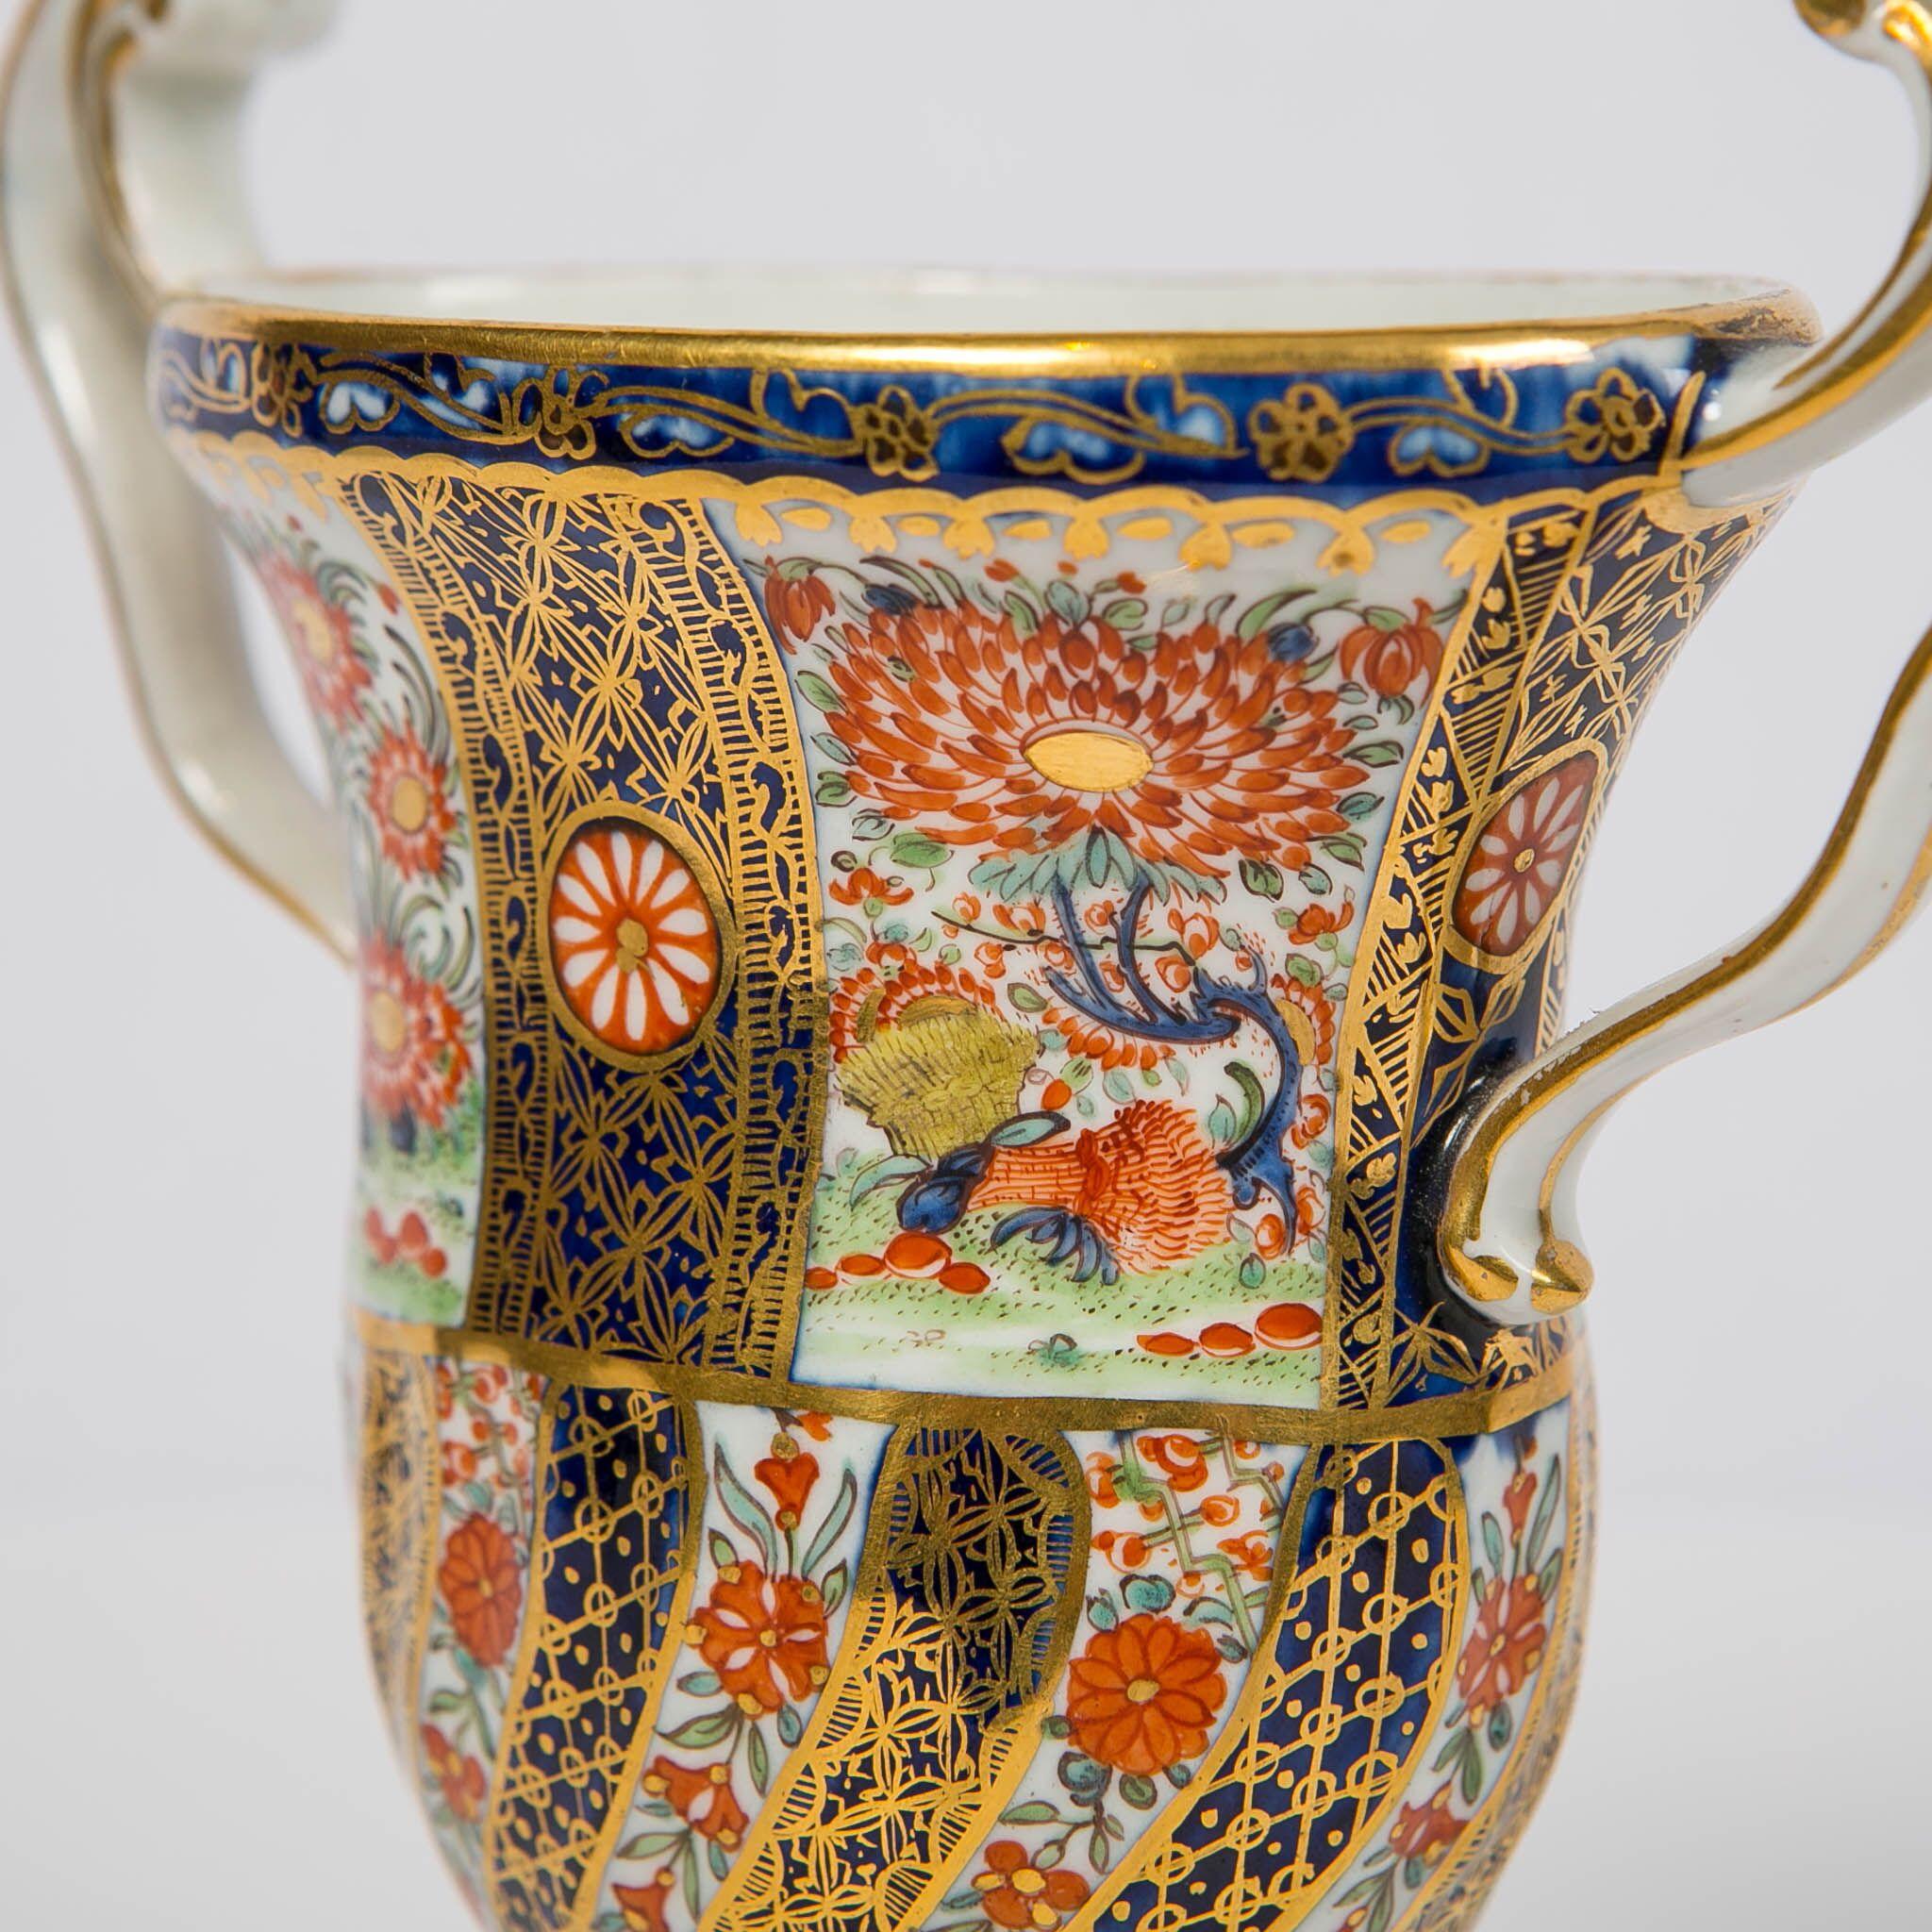 Why we love it the gilding, the colors, the artistry
We are excited to present this Worcester bud vase in the 